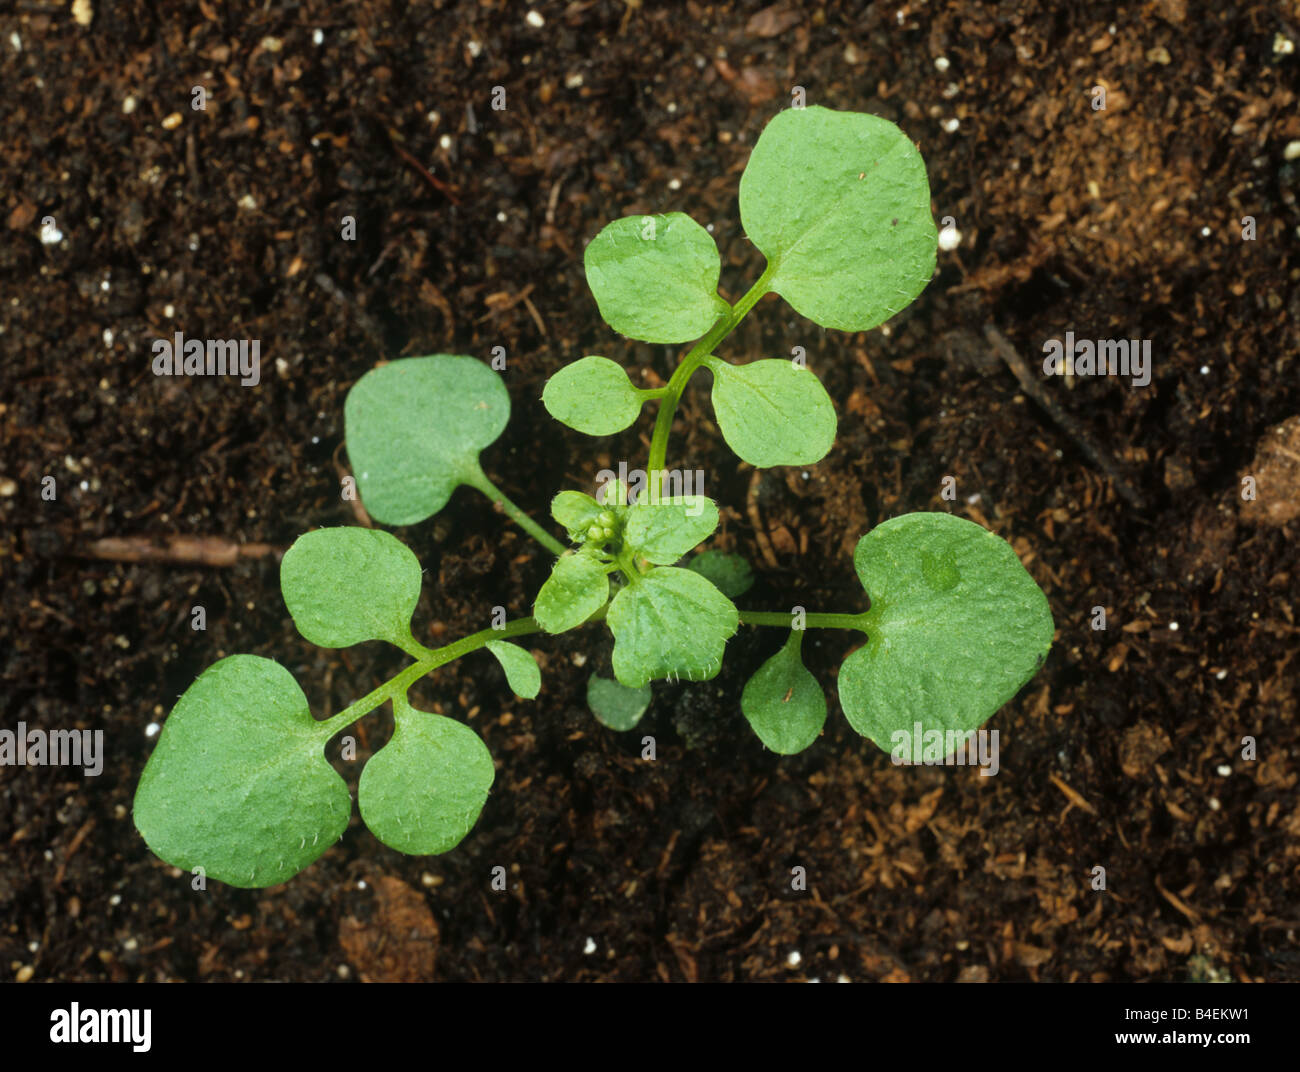 Young hairy bittercress Cardamine hirsuta plant against a soil background Stock Photo